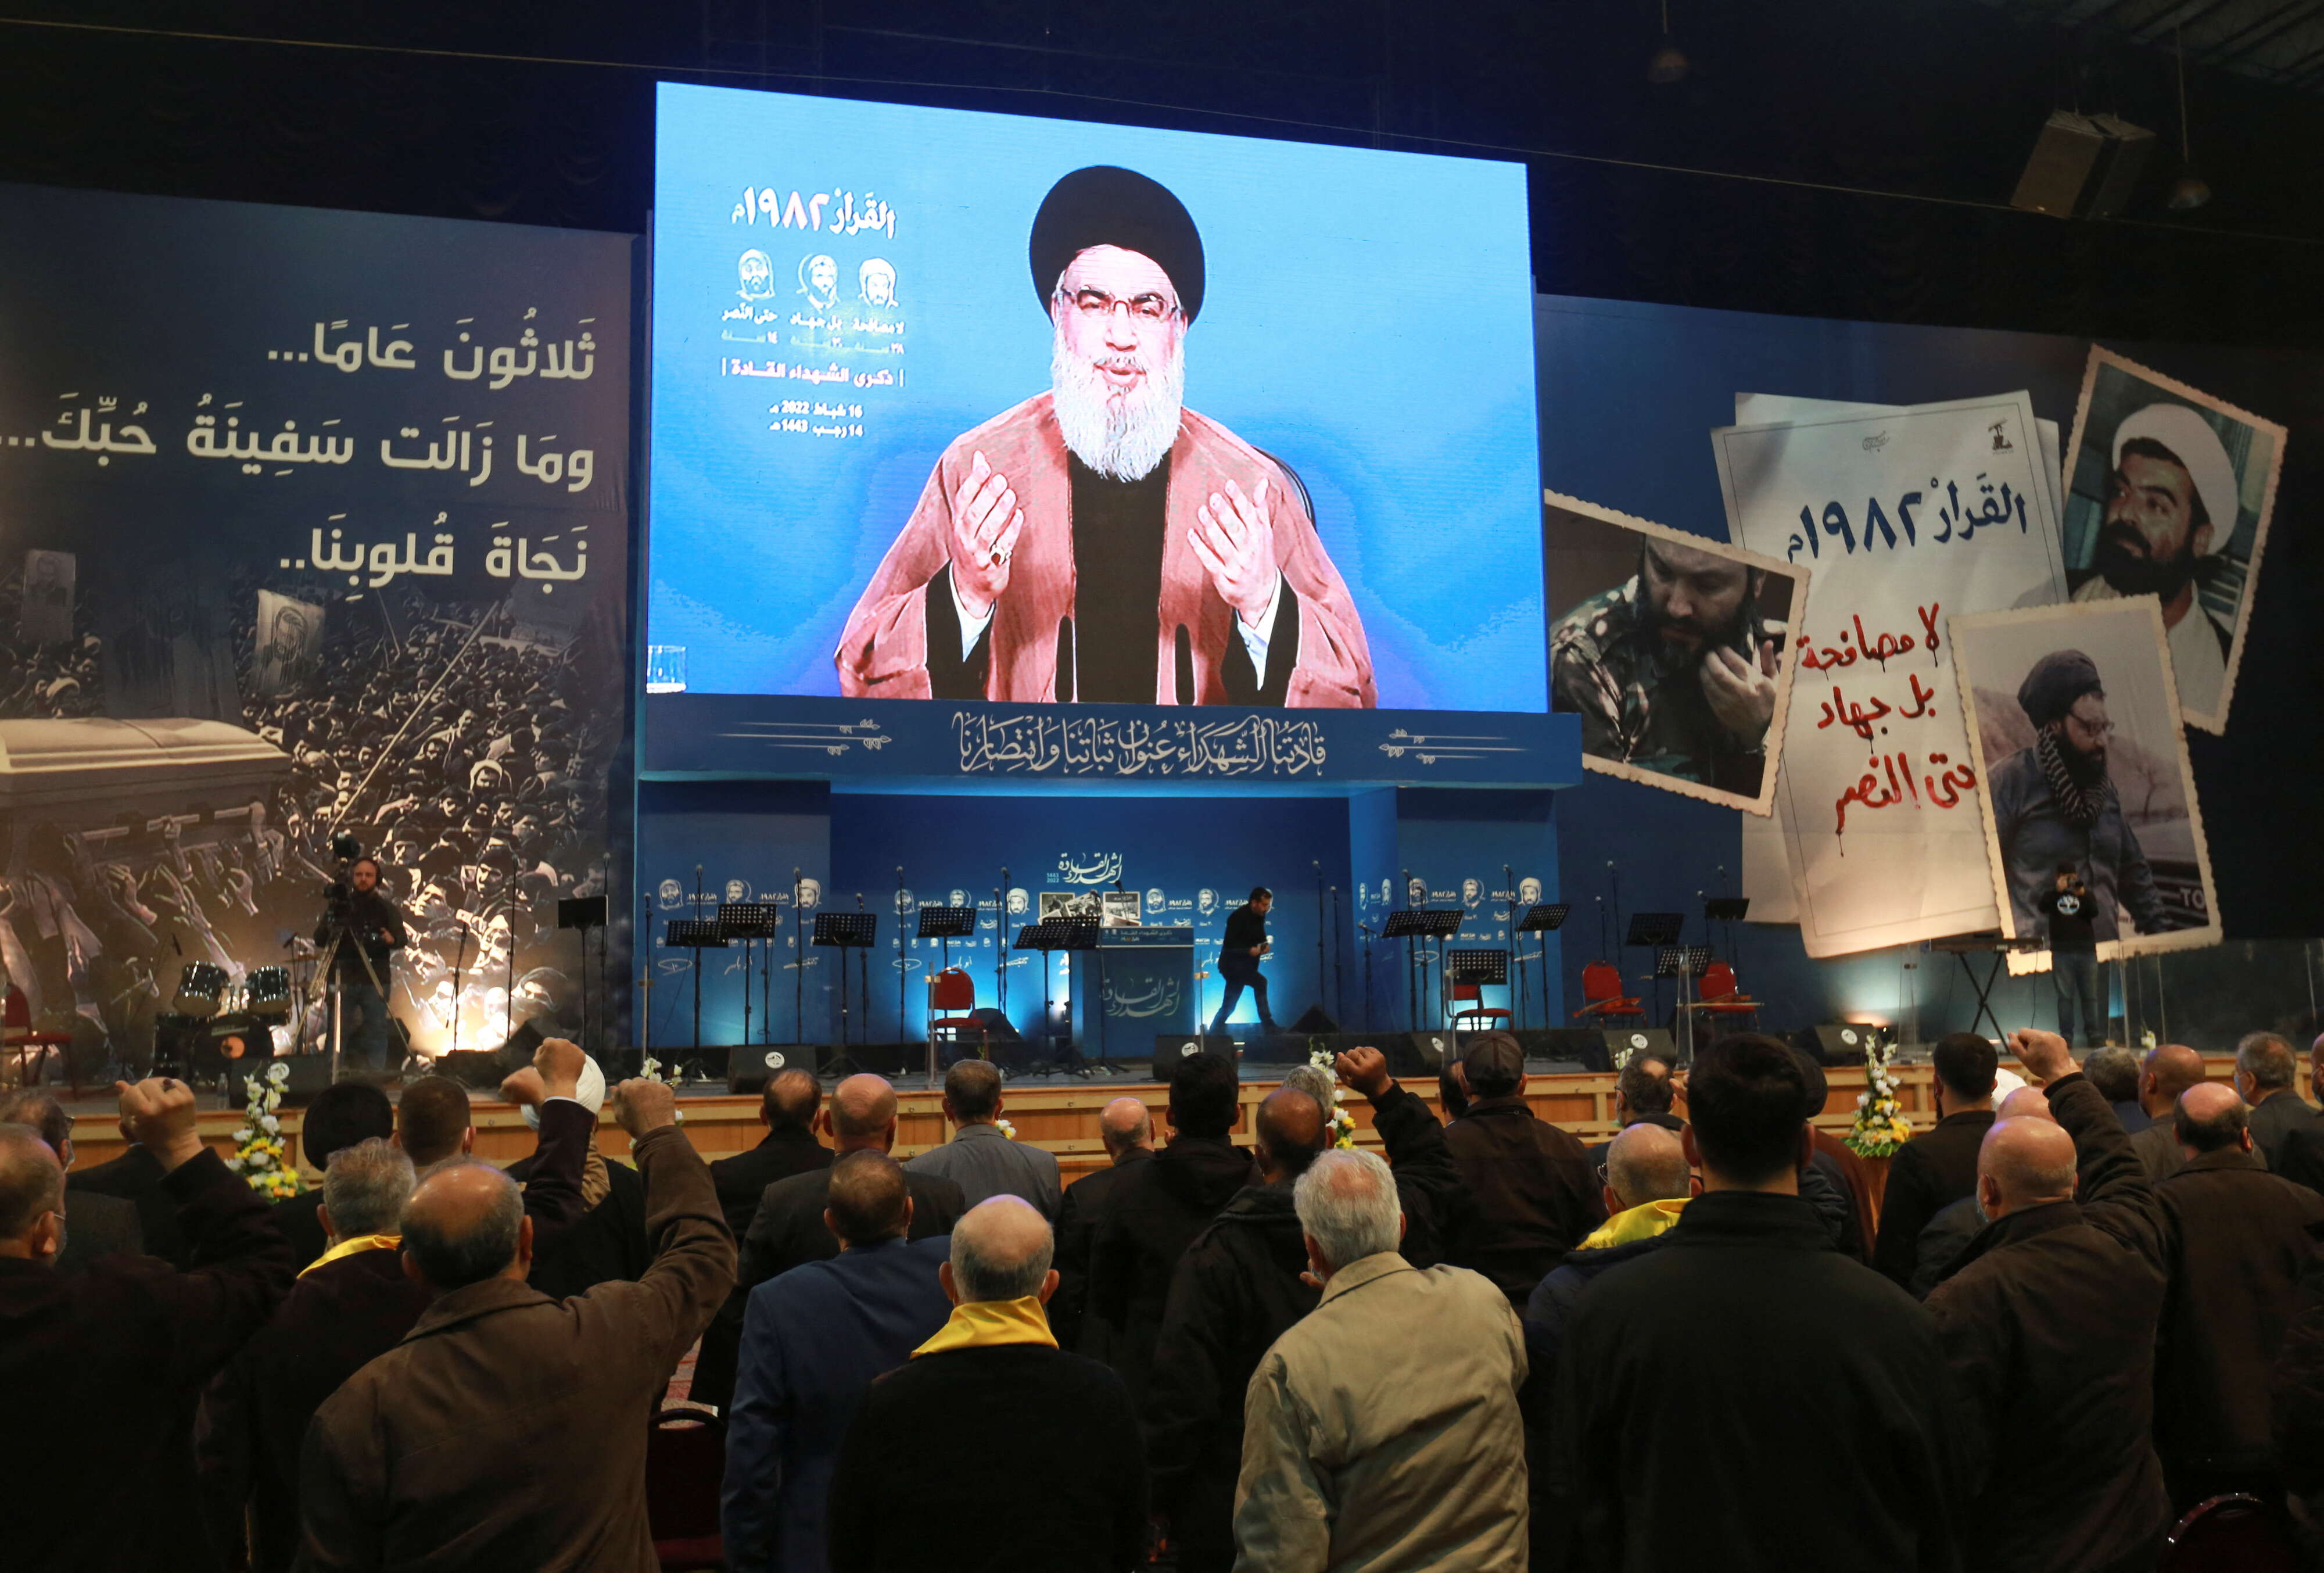 Lebanon's Hezbollah leader Sayyed Hassan Nasrallah addresses his supporters on screen during a rally commemorating the group's late leaders in Beirut